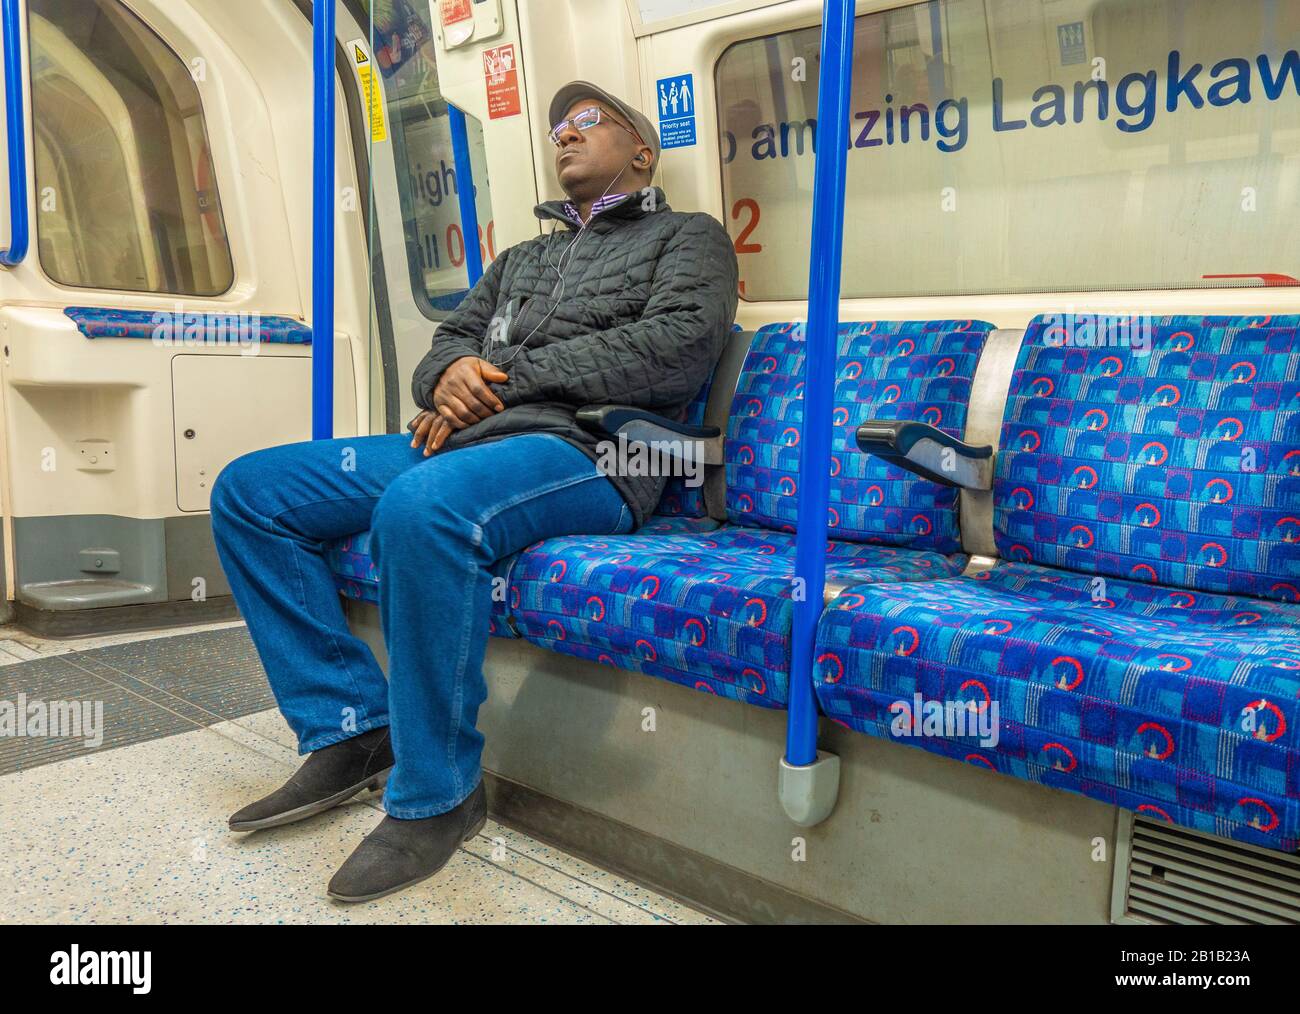 Black man / male seated passenger, dozing on a quiet London Underground tube train carriage, and listening to music through headphones. England, UK. Stock Photo